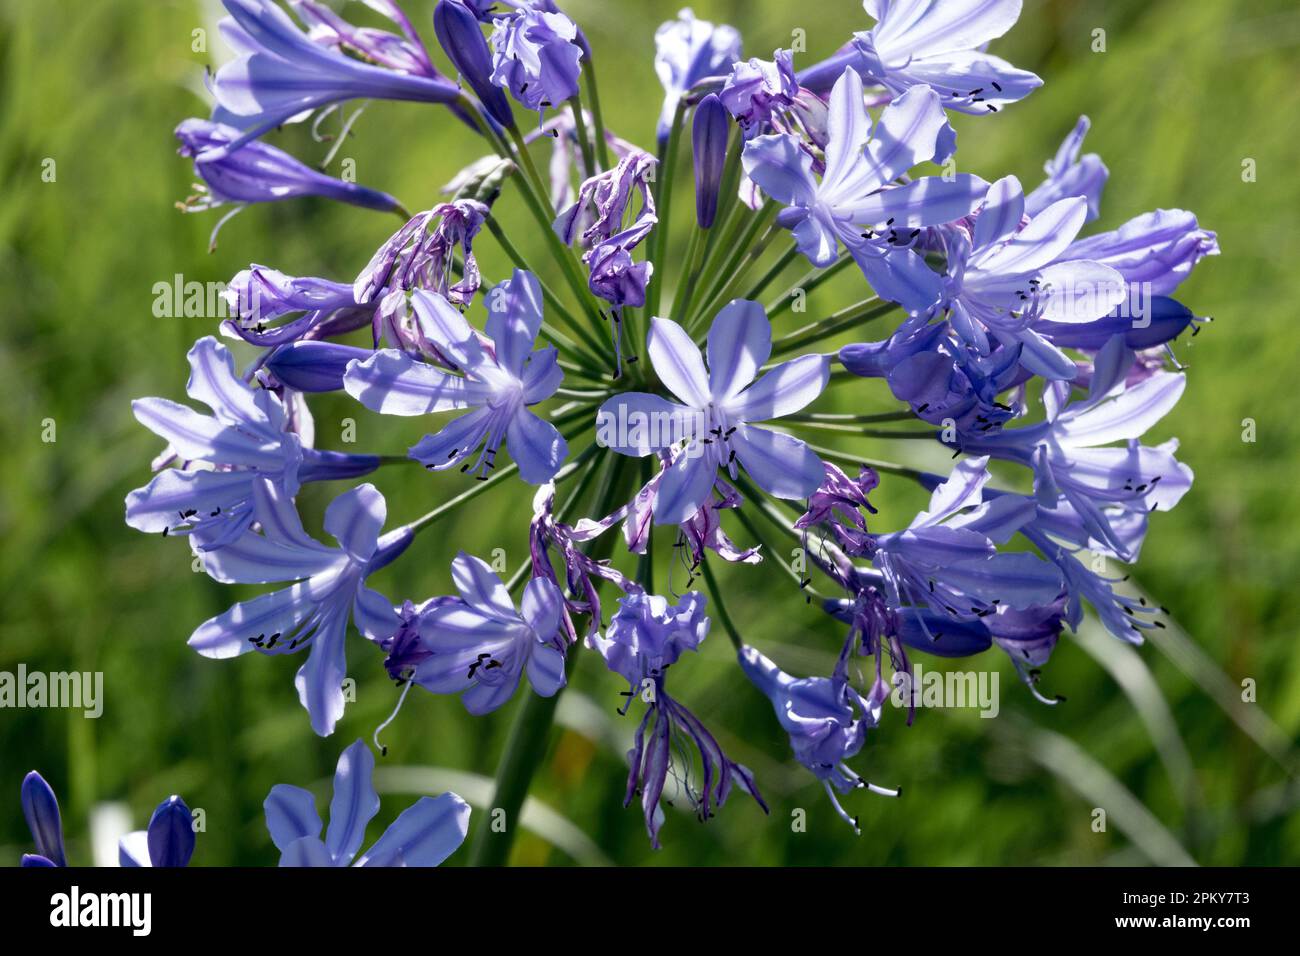 African Blue Lily, Agapanthus africanus flower Stock Photo